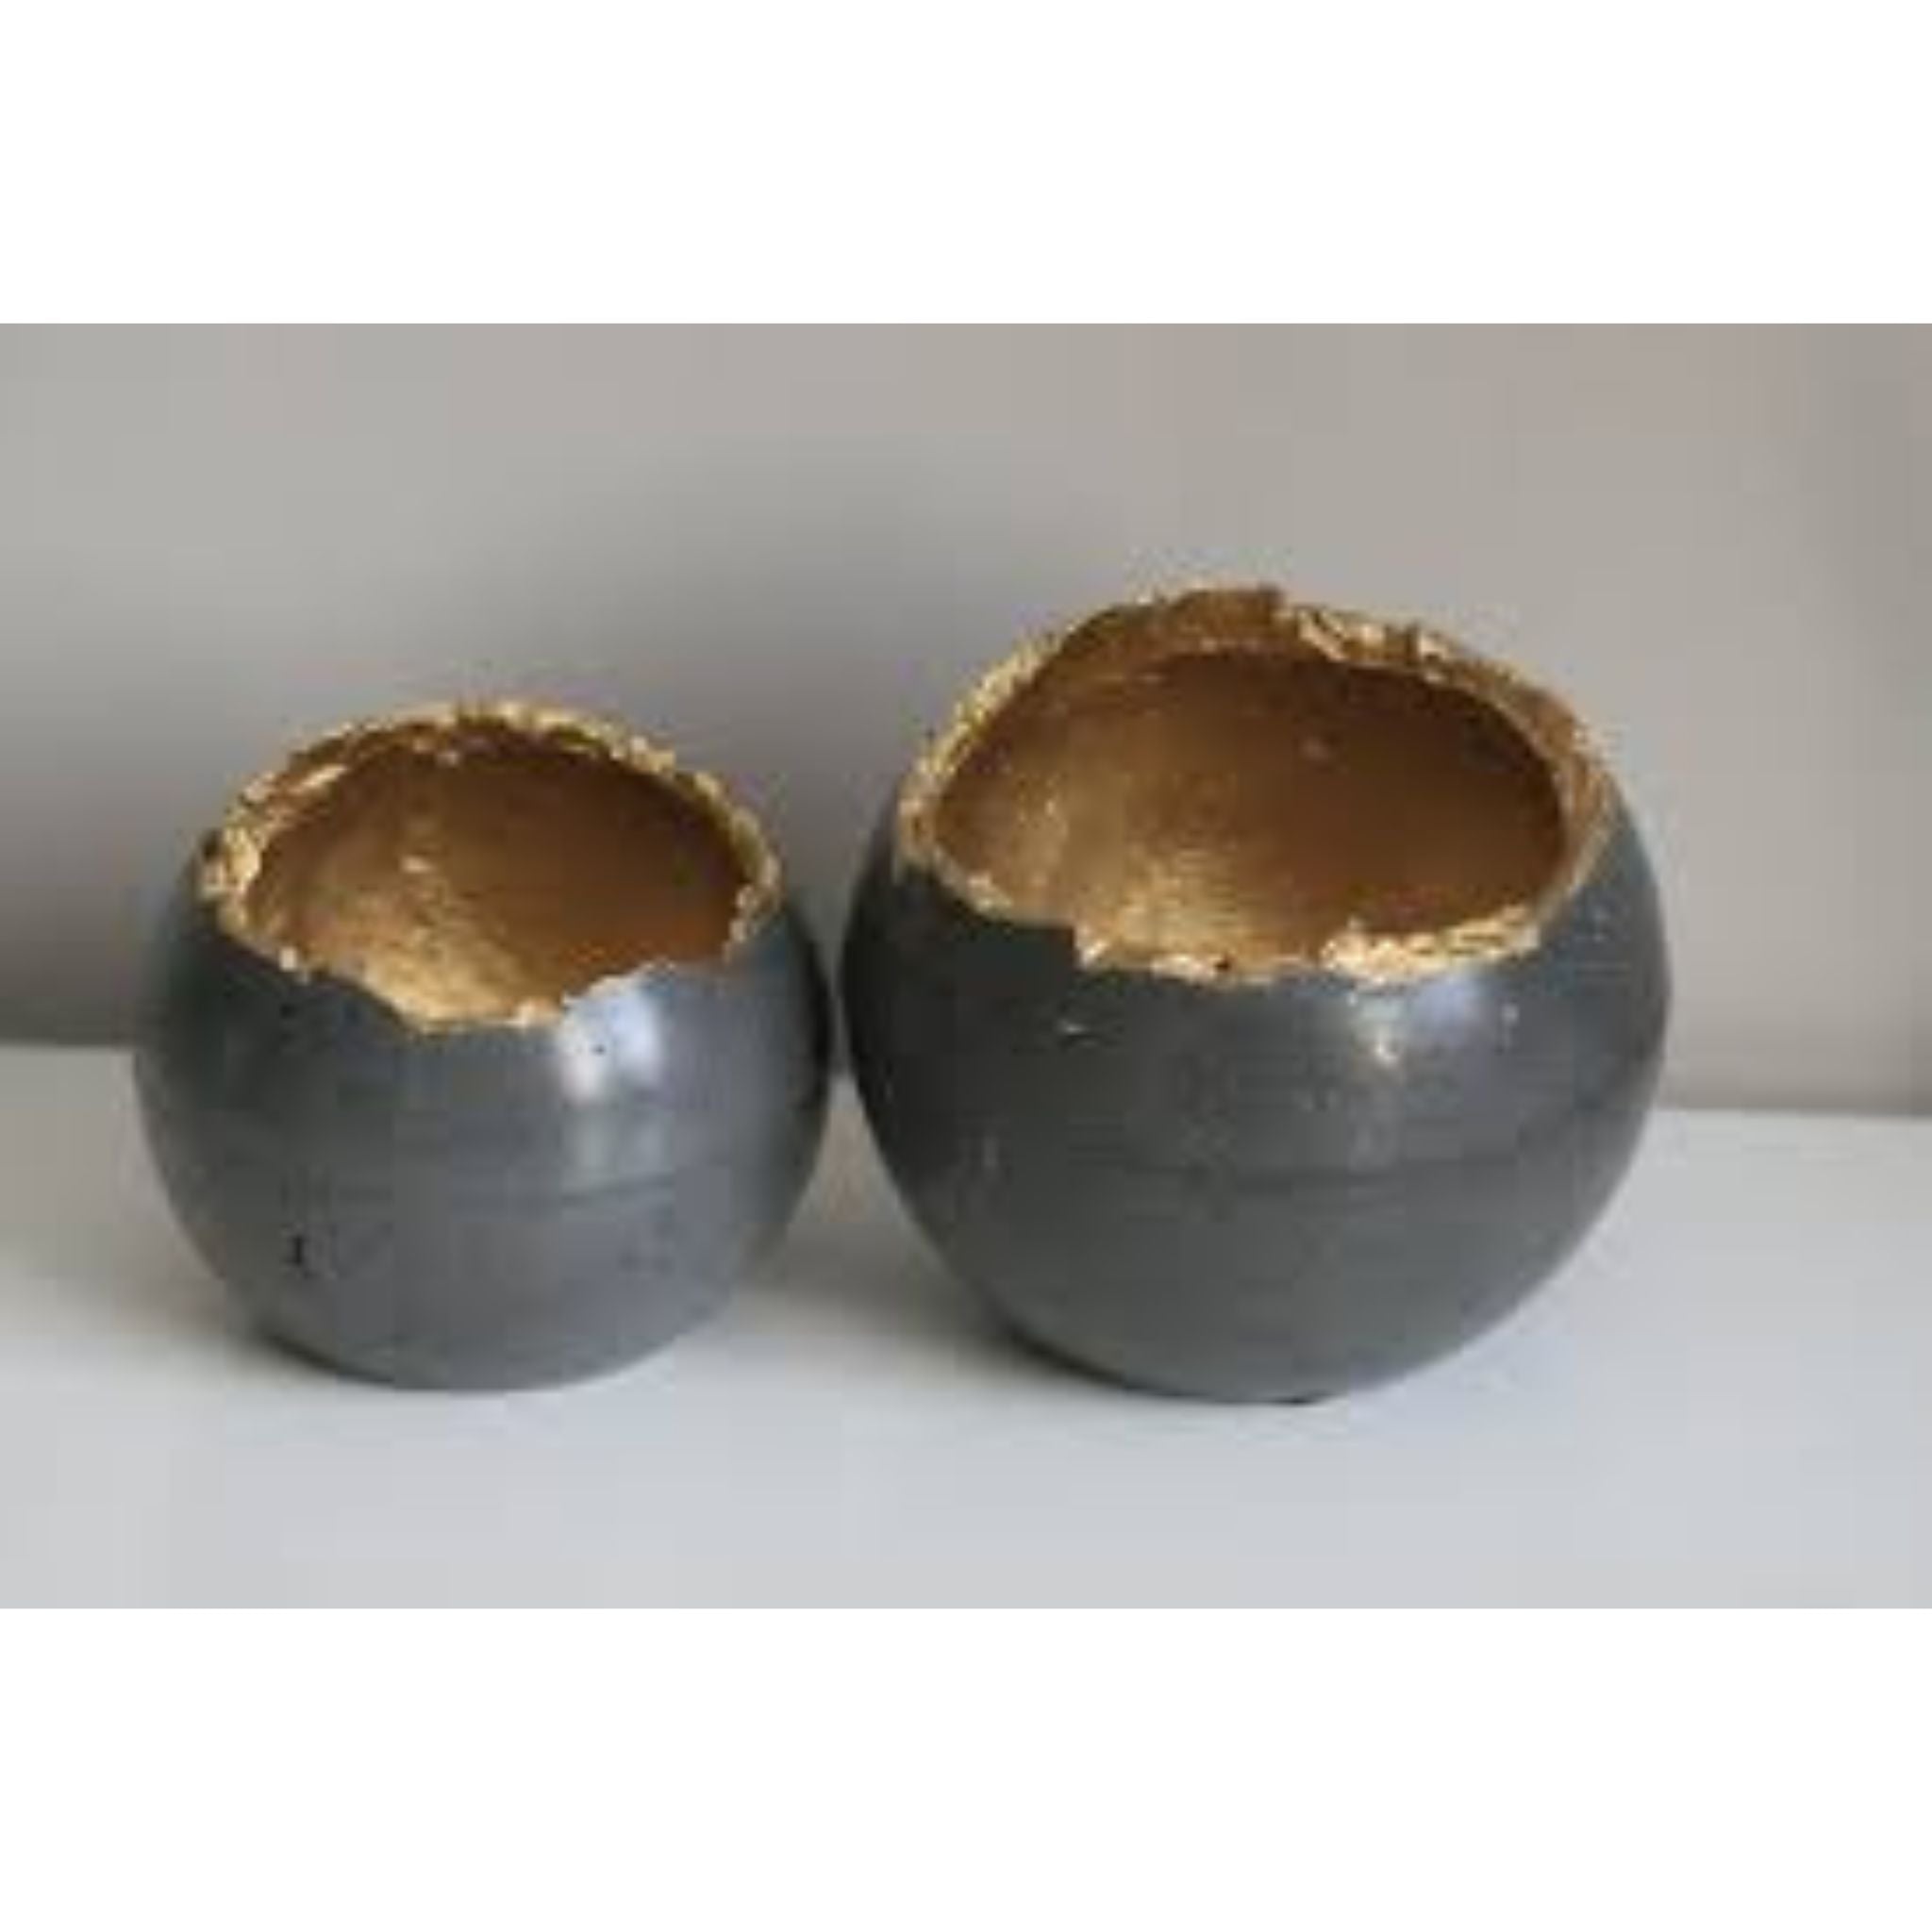 Concrete Tealight Holder Charcoal two candles holders with no candle